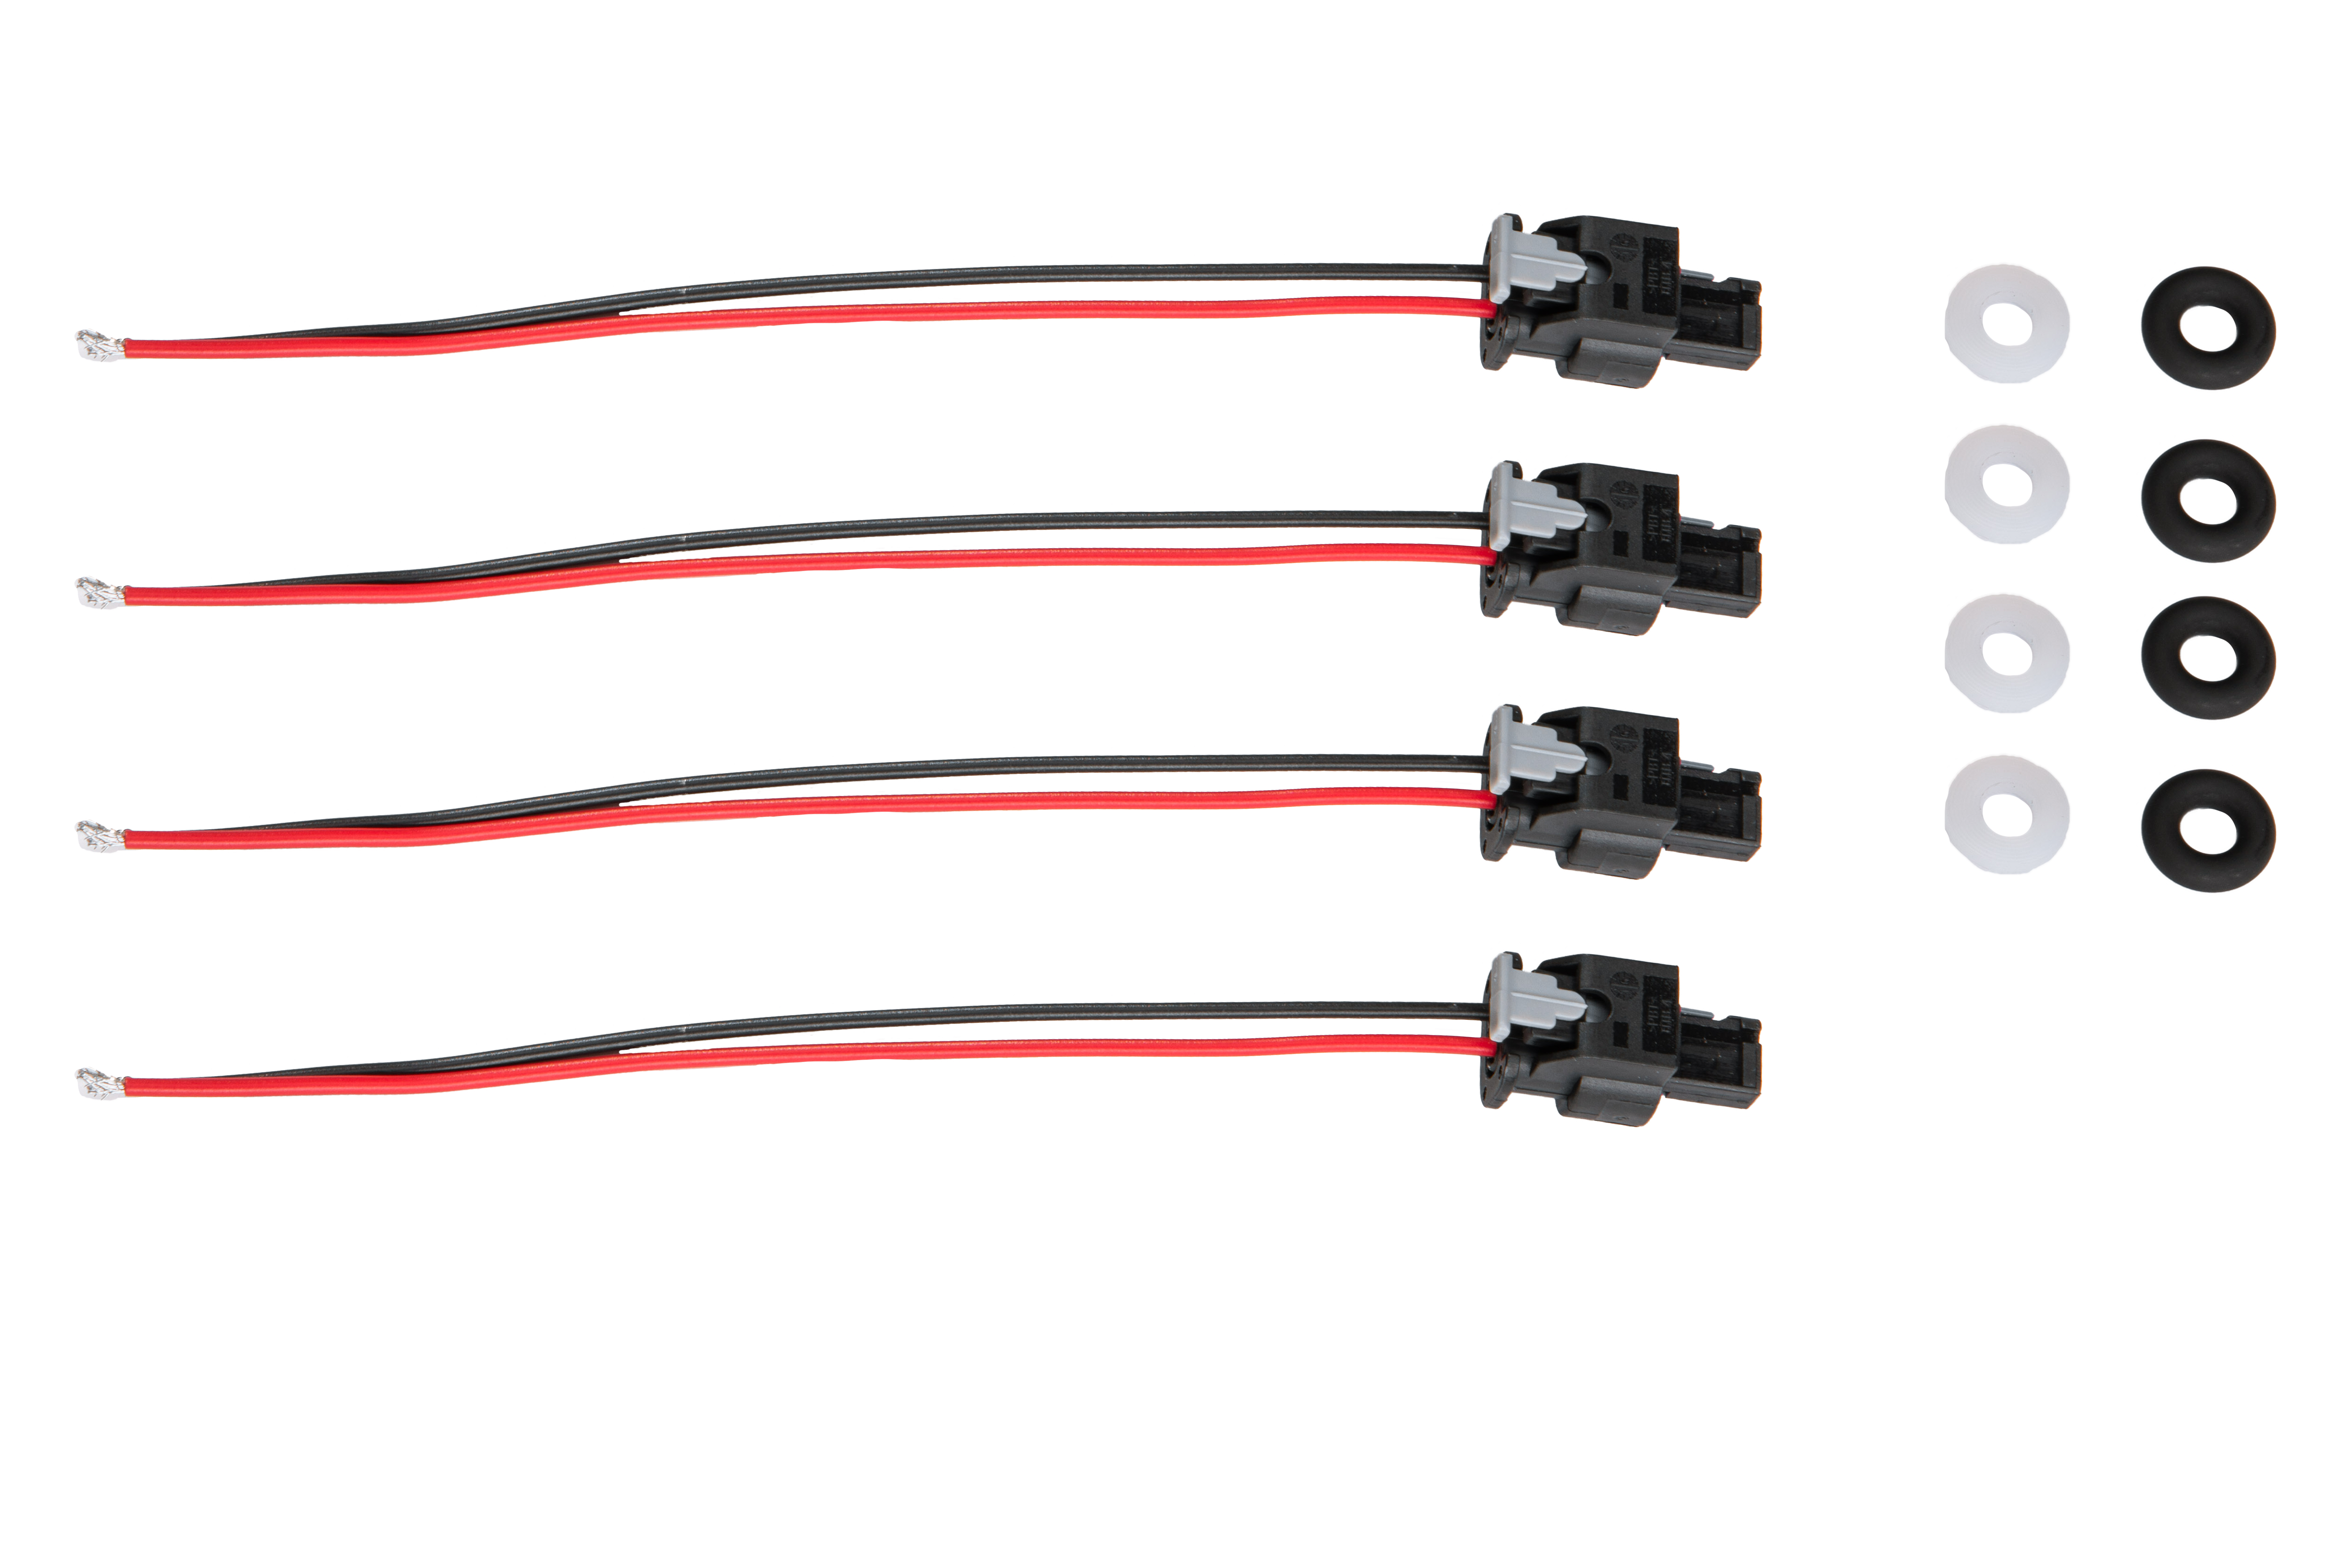 1.4 TSI EA111 - Spare Injectors Wiring Kit for 420hp Injectors